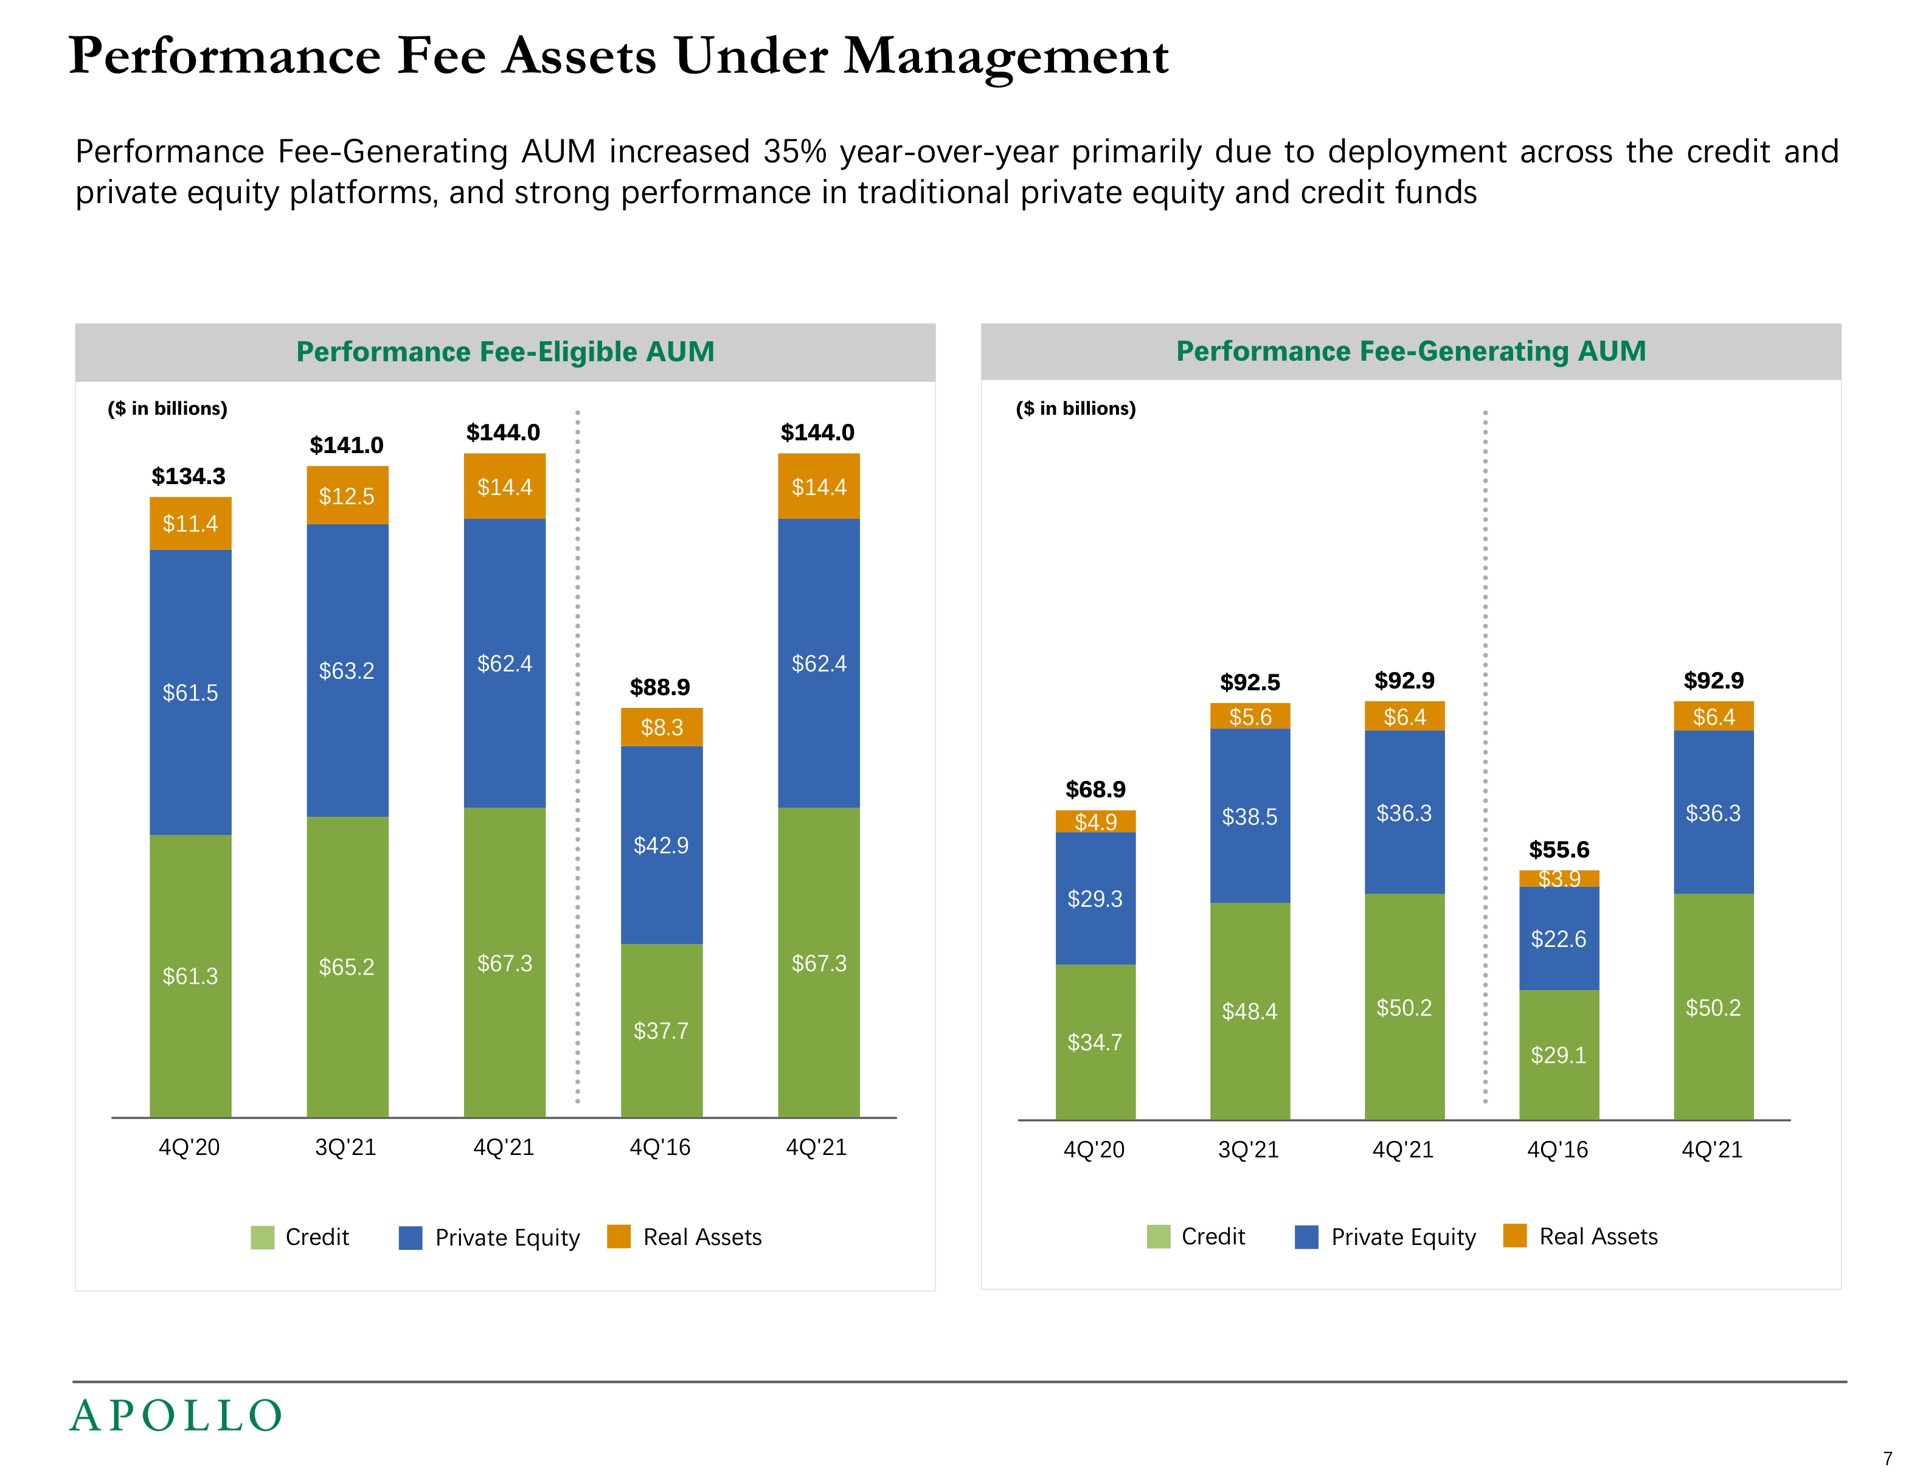 performance fee assets under management performance fee generating aum increased year over year primarily due to deployment across the credit and private equity platforms and strong performance in traditional private equity and credit funds fee eligible | Apollo Global Management